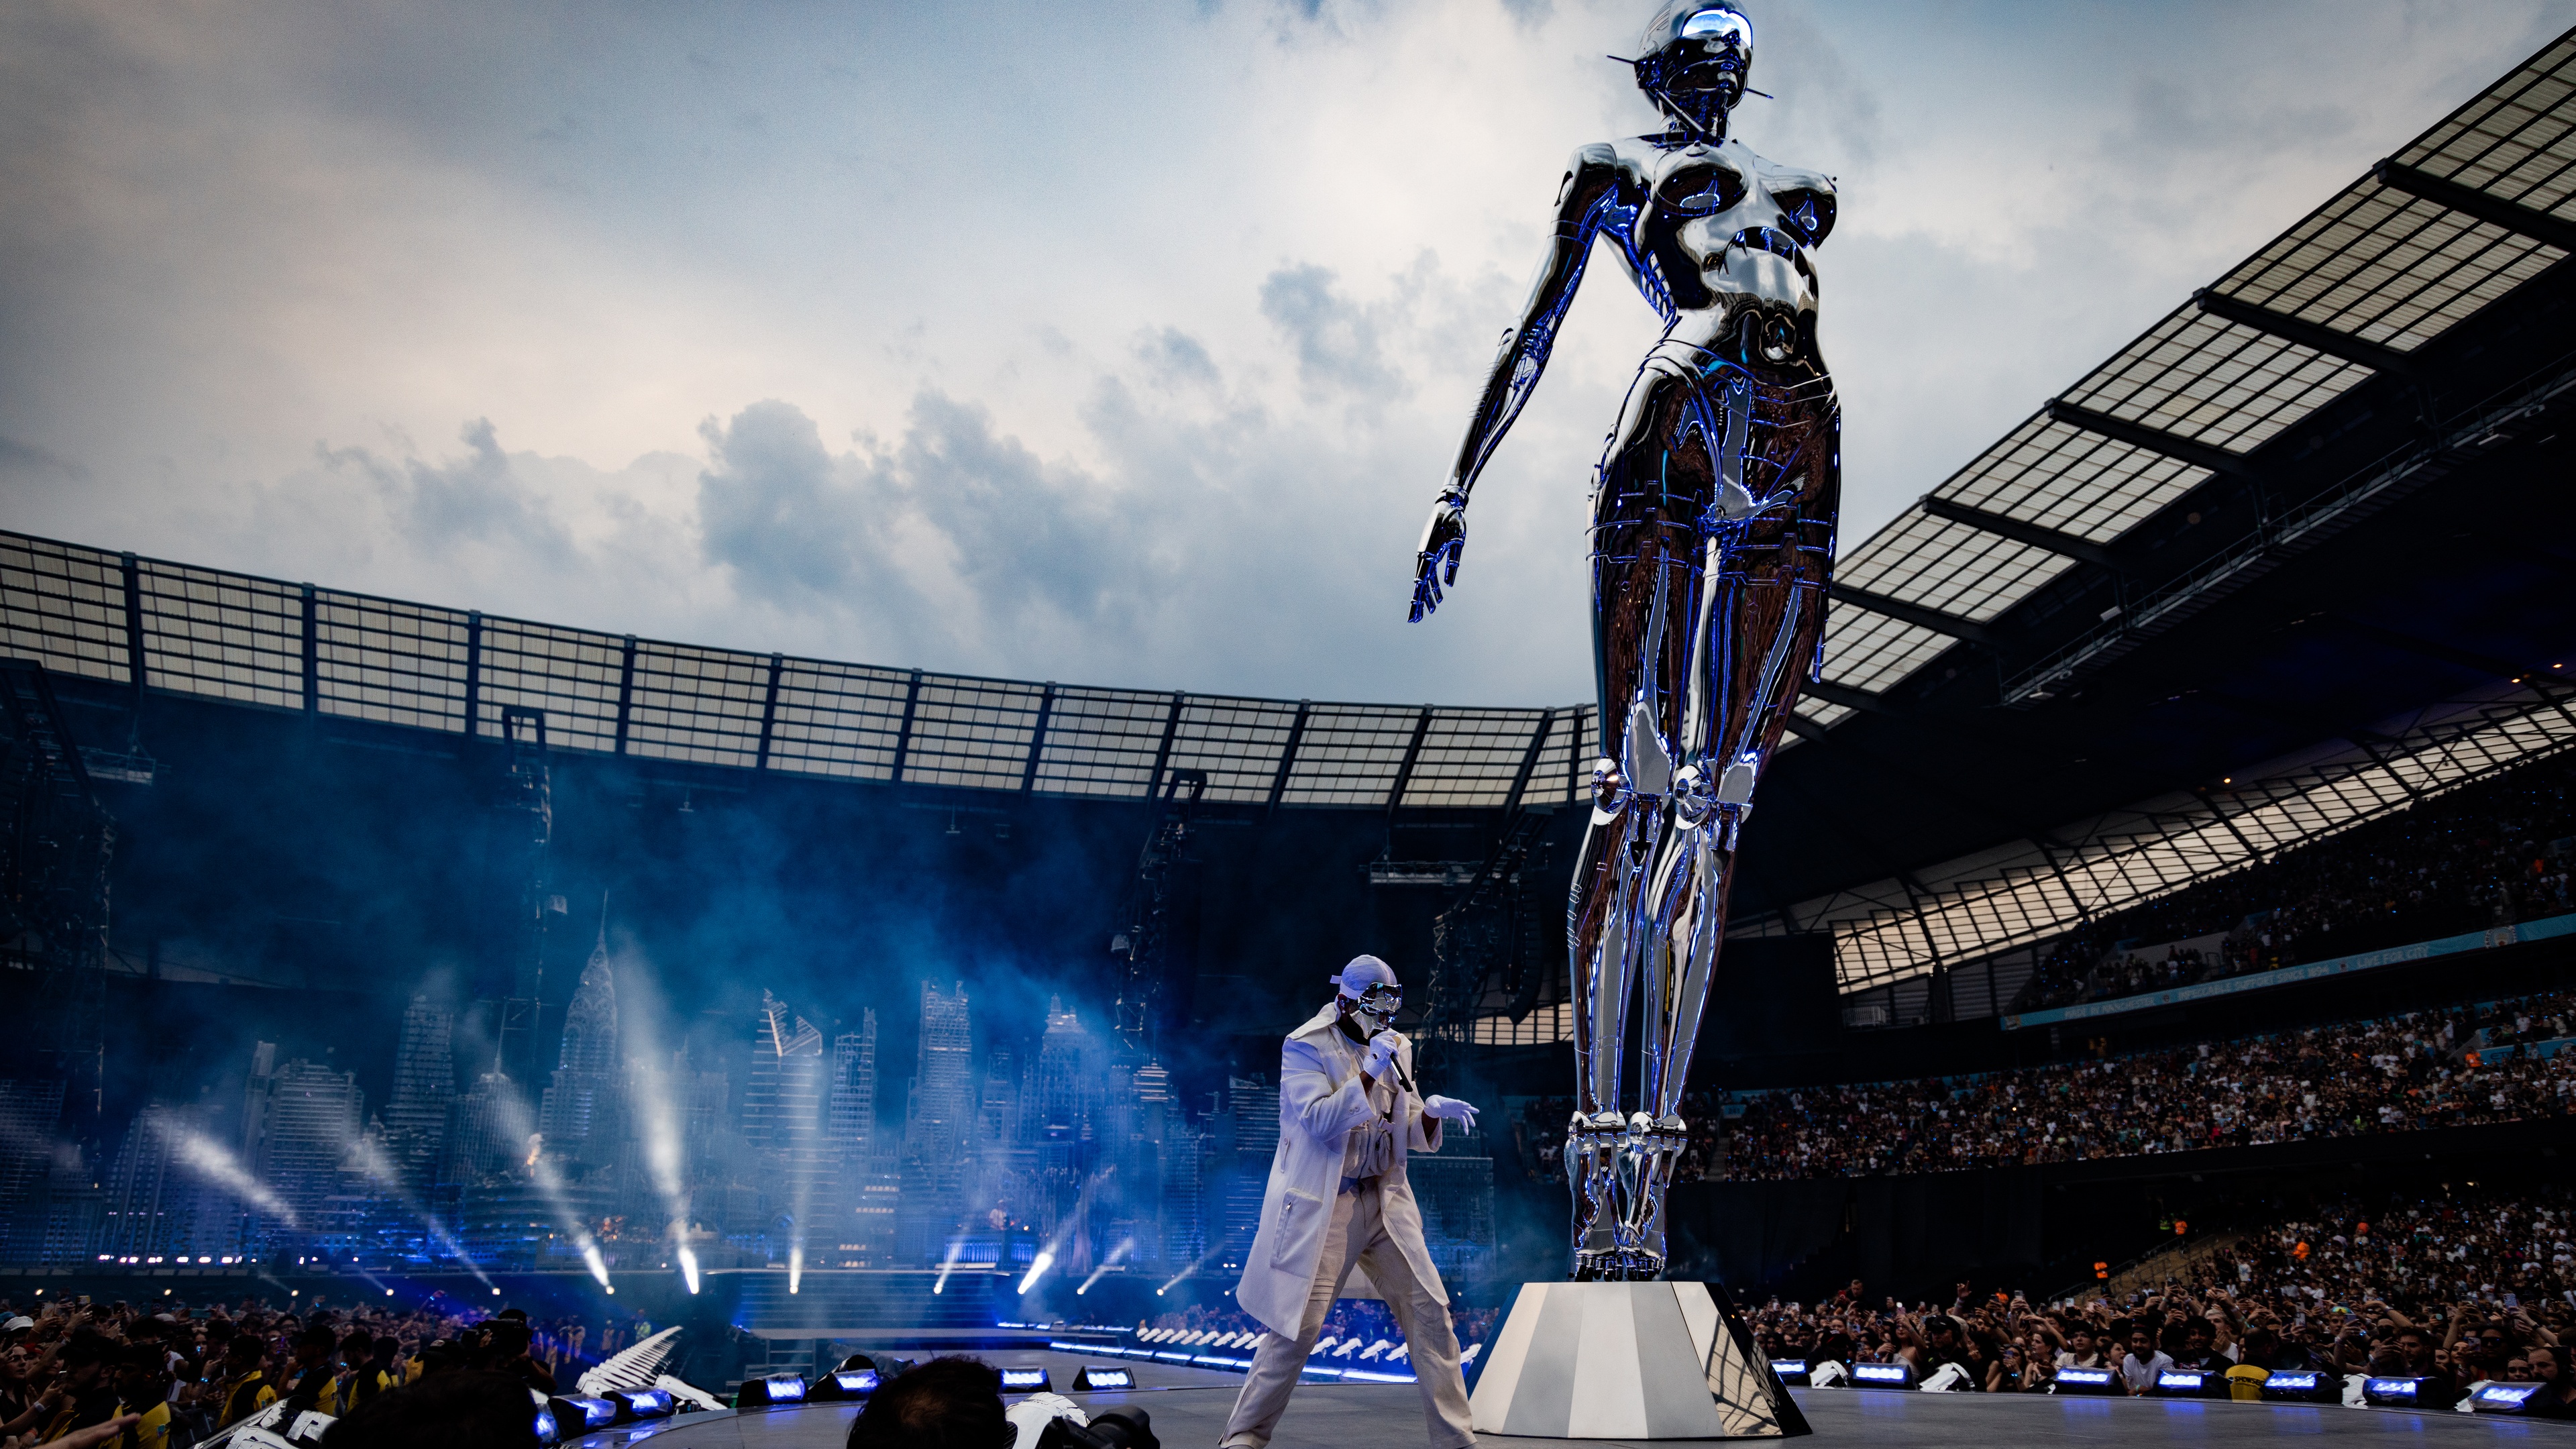 The Weeknd performing in the middle of stage inside stadium next to a huge robot sculpture